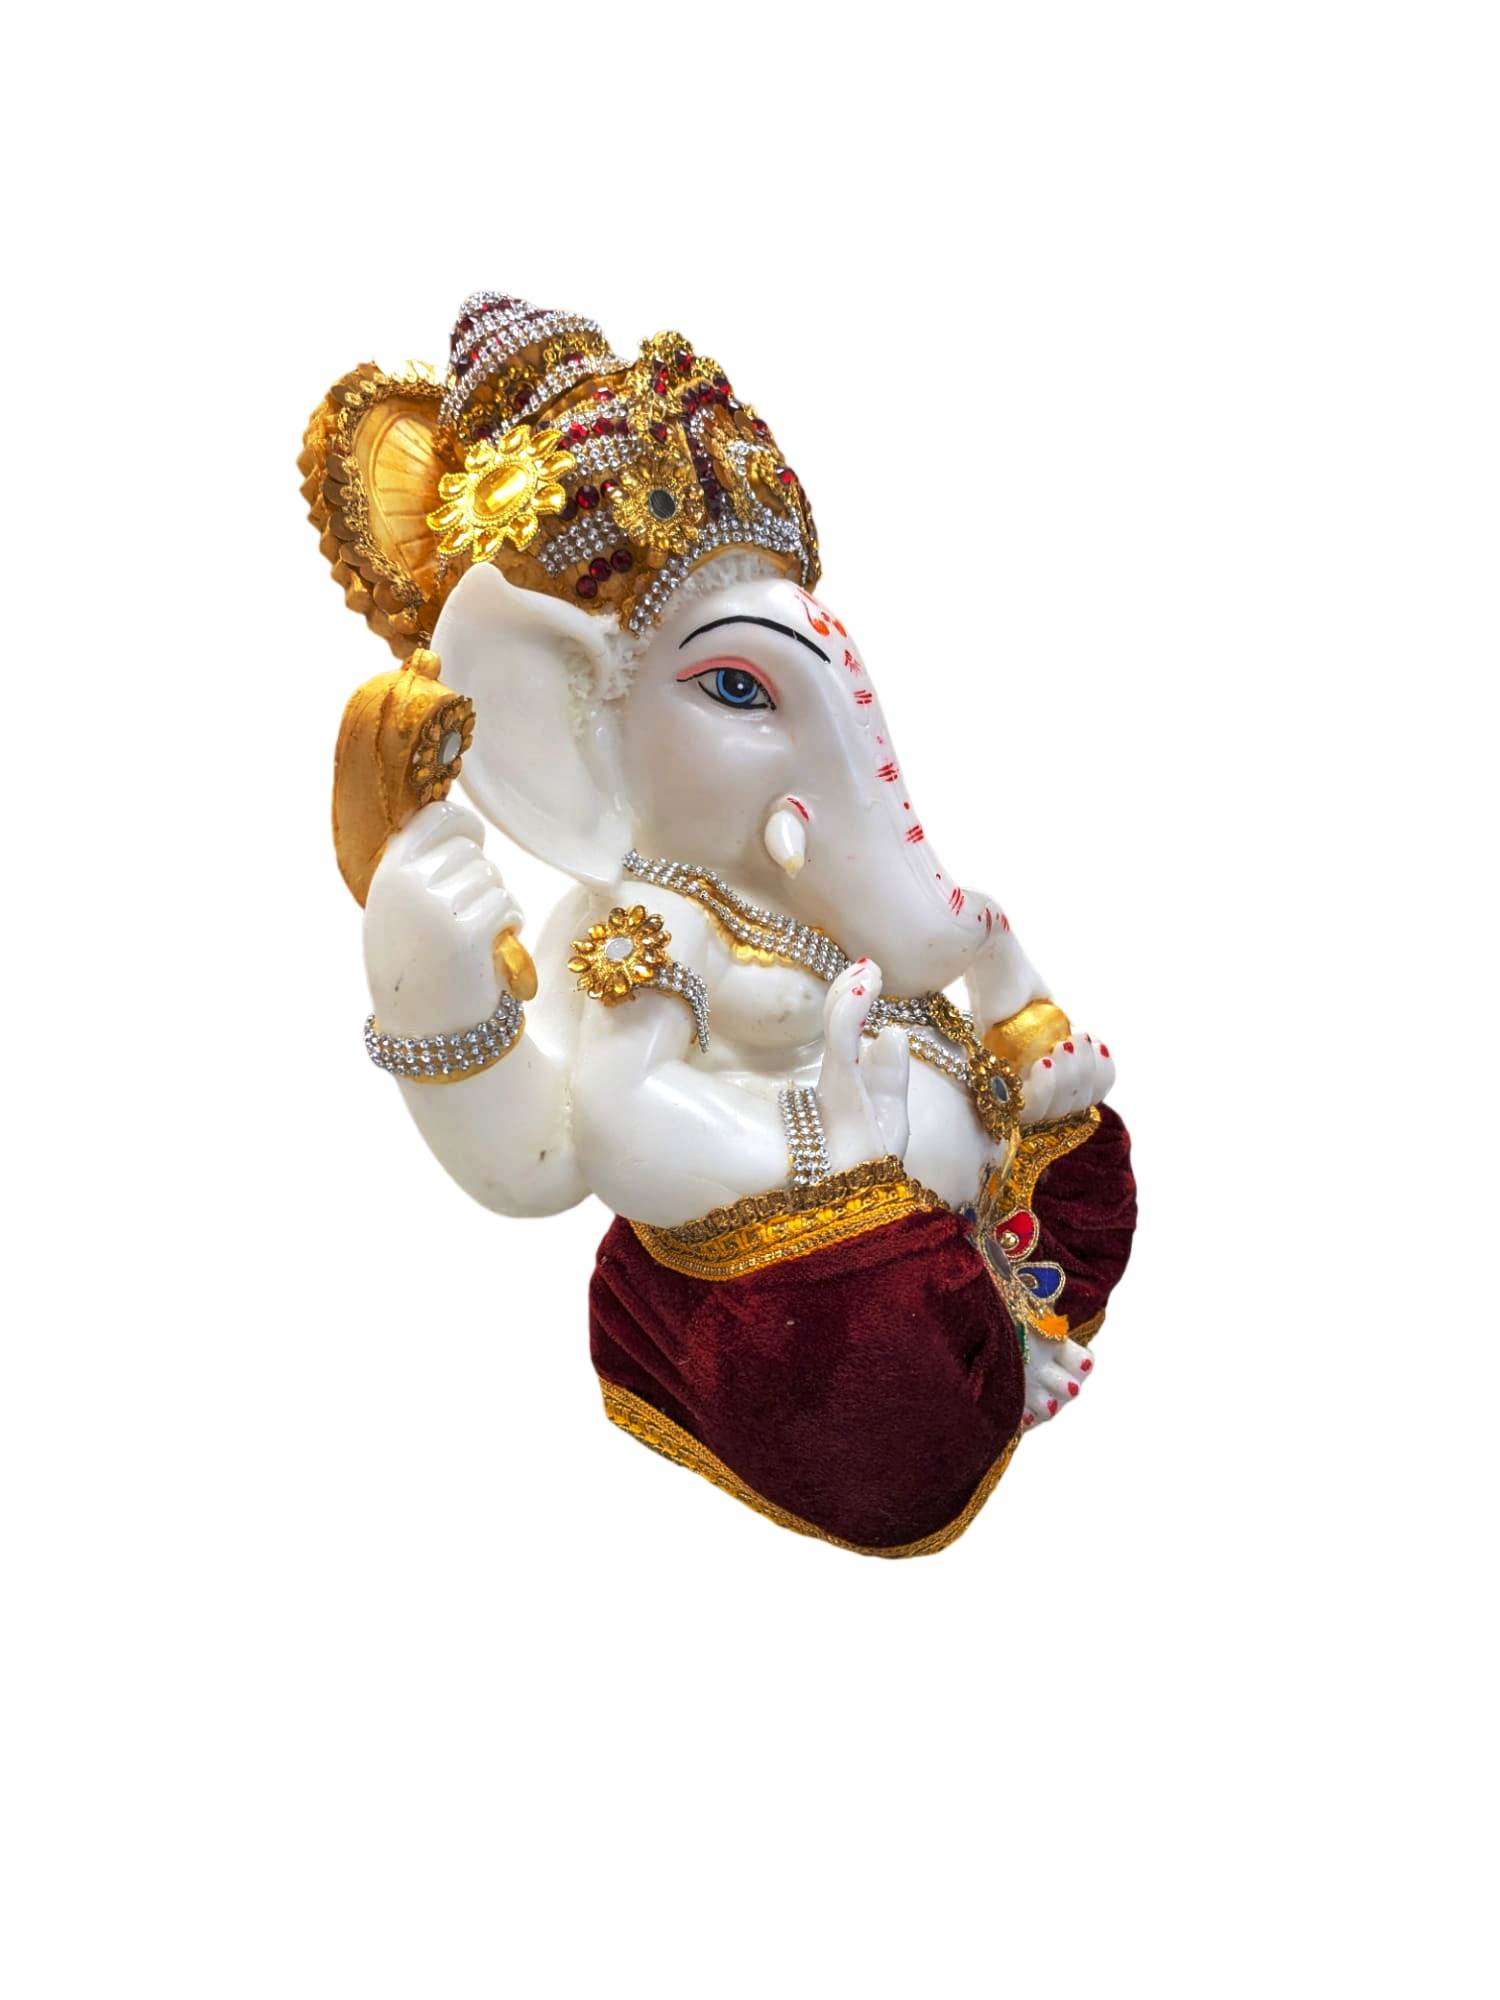 Image of a Large Sized Ganesha Idol with colored dhoti and decorations. Perfect Gift for House warming